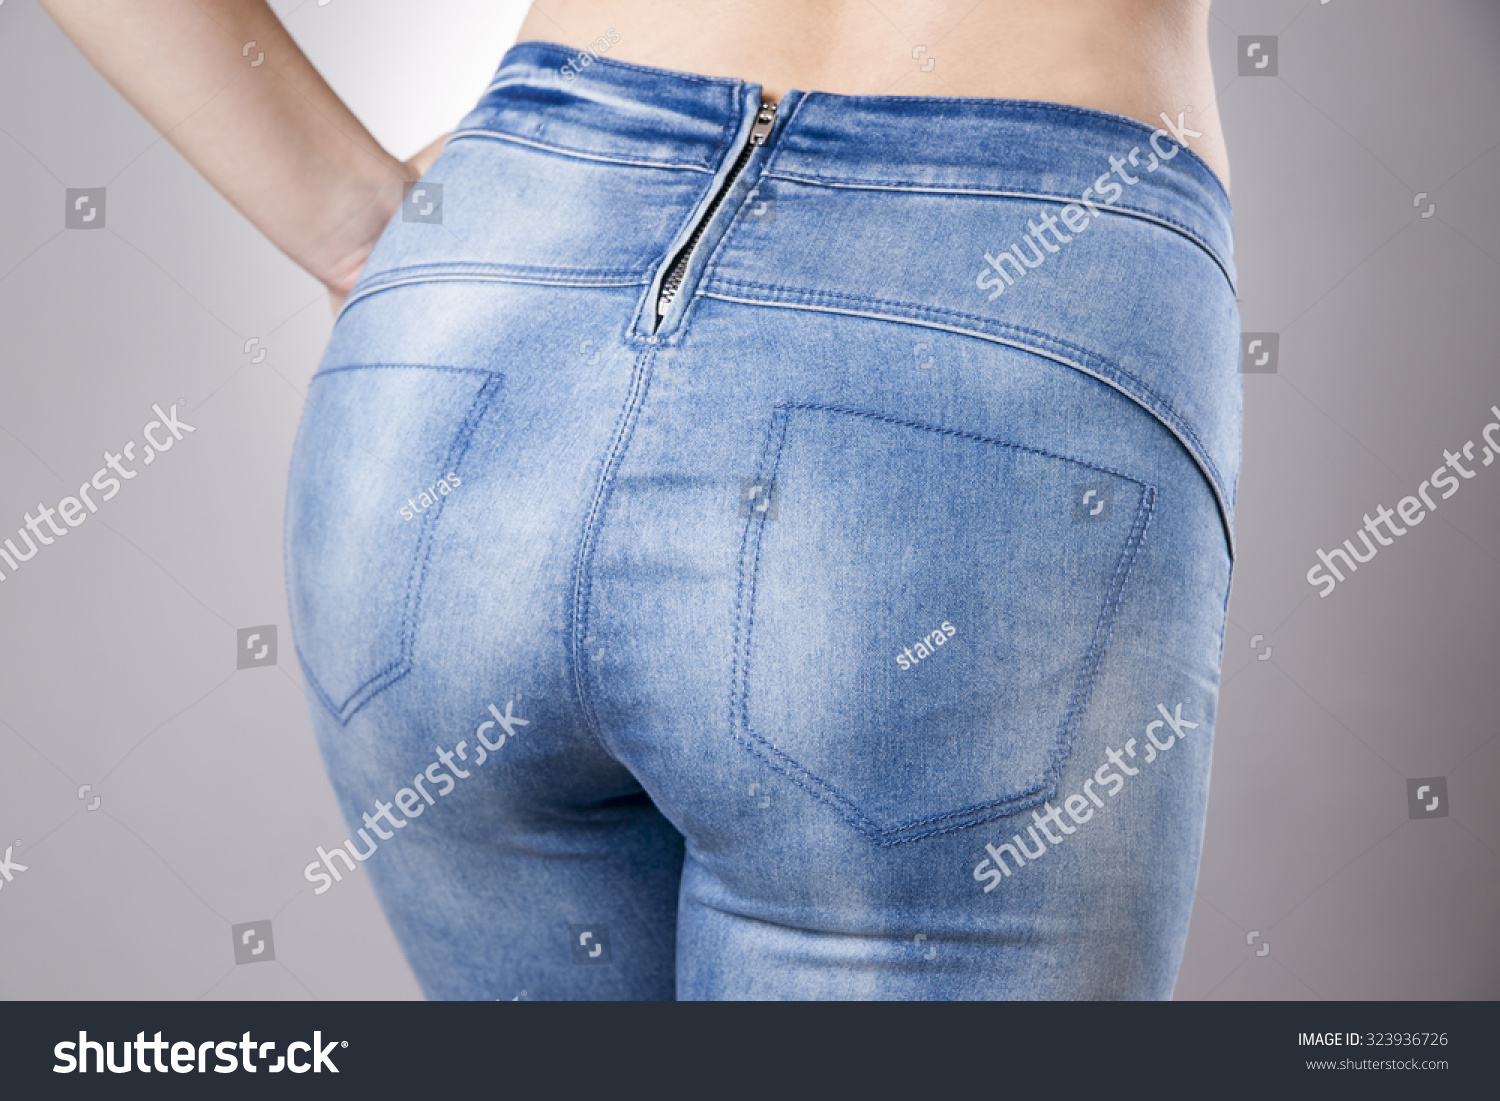 Woman In Jeans Close Up. Beautiful Female Hips And Buttocks On A Gray ...